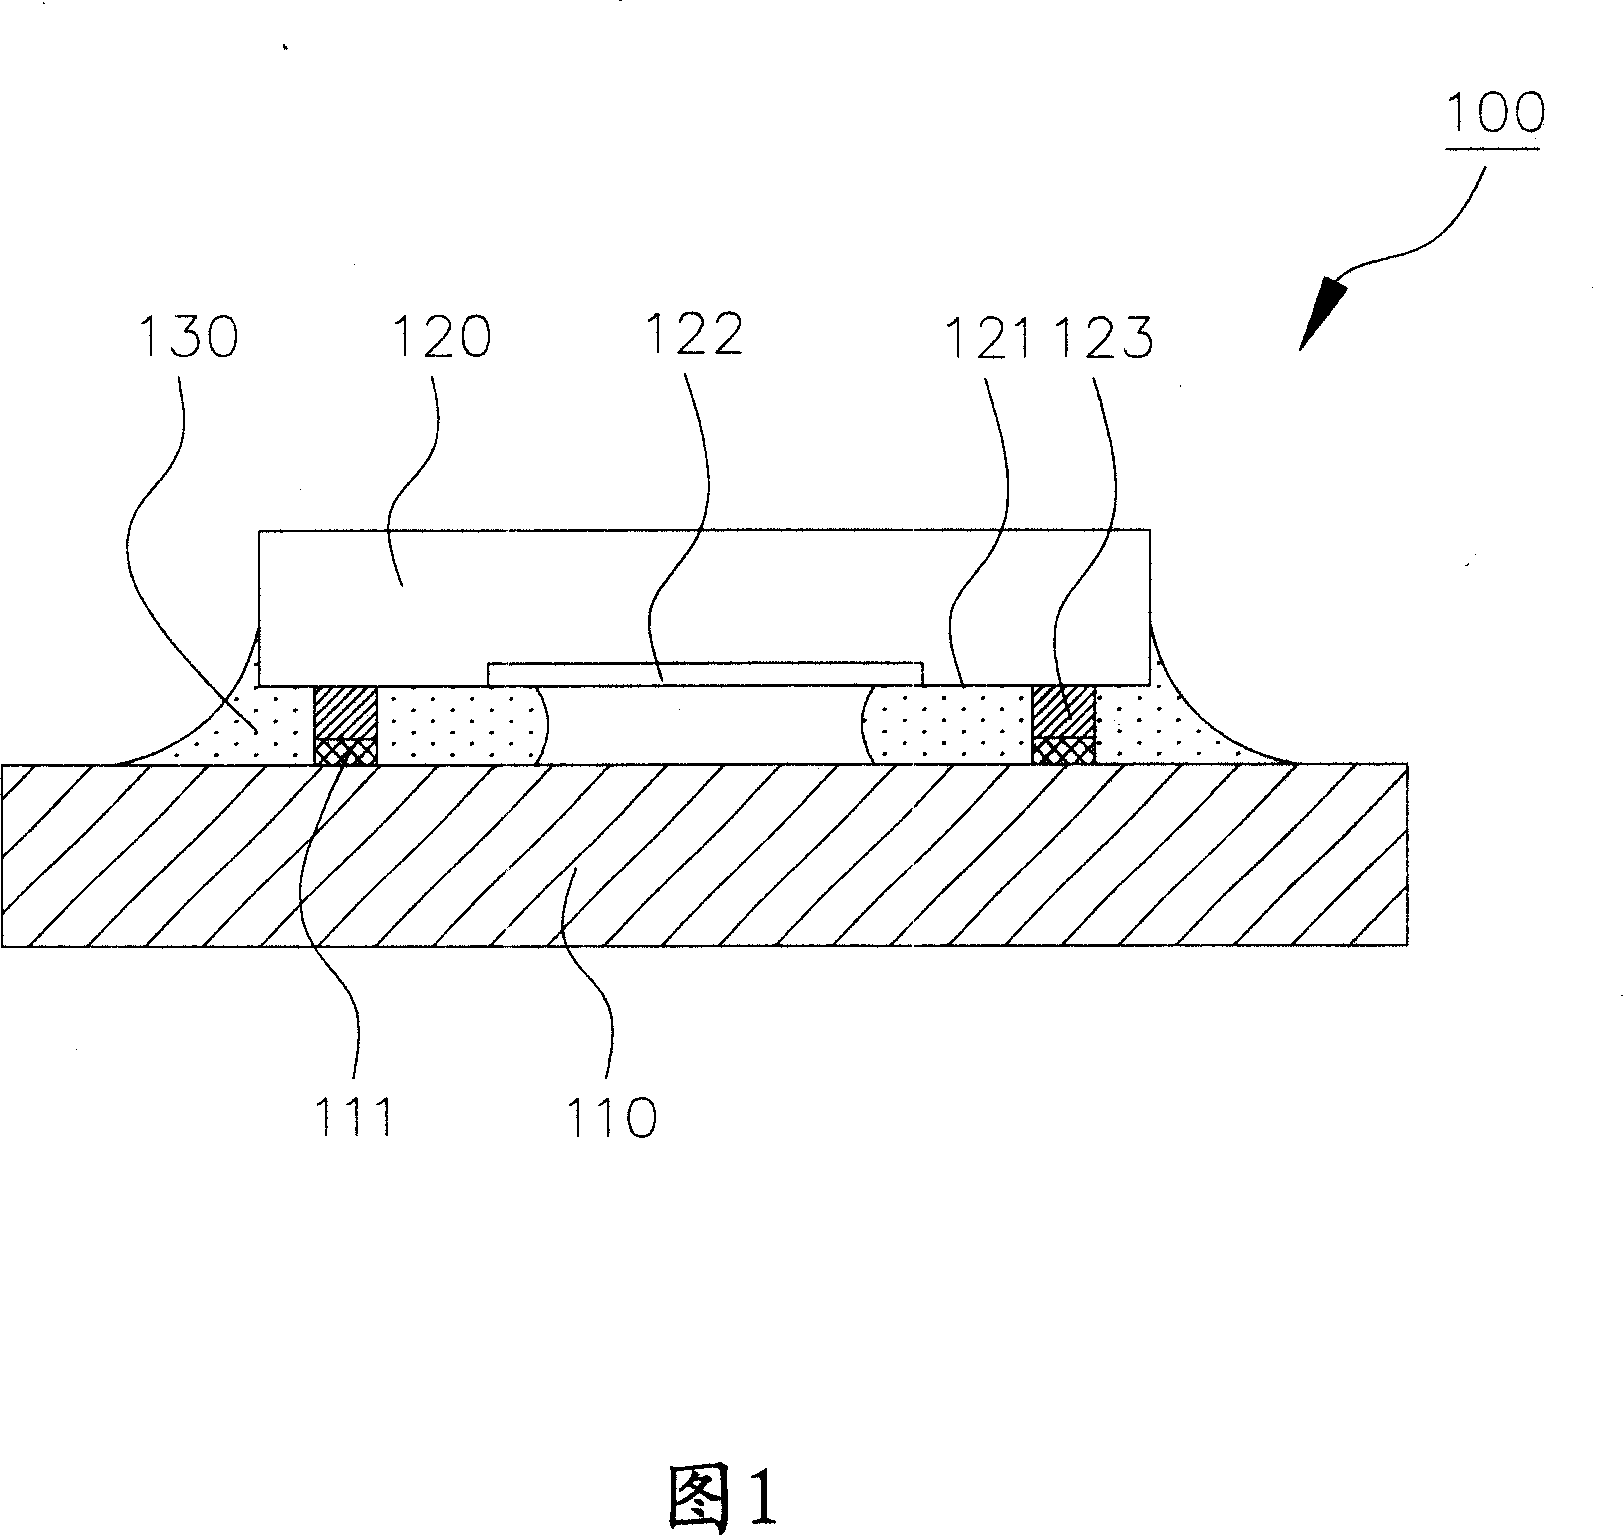 Glass crystal packaging structure for image sensory element